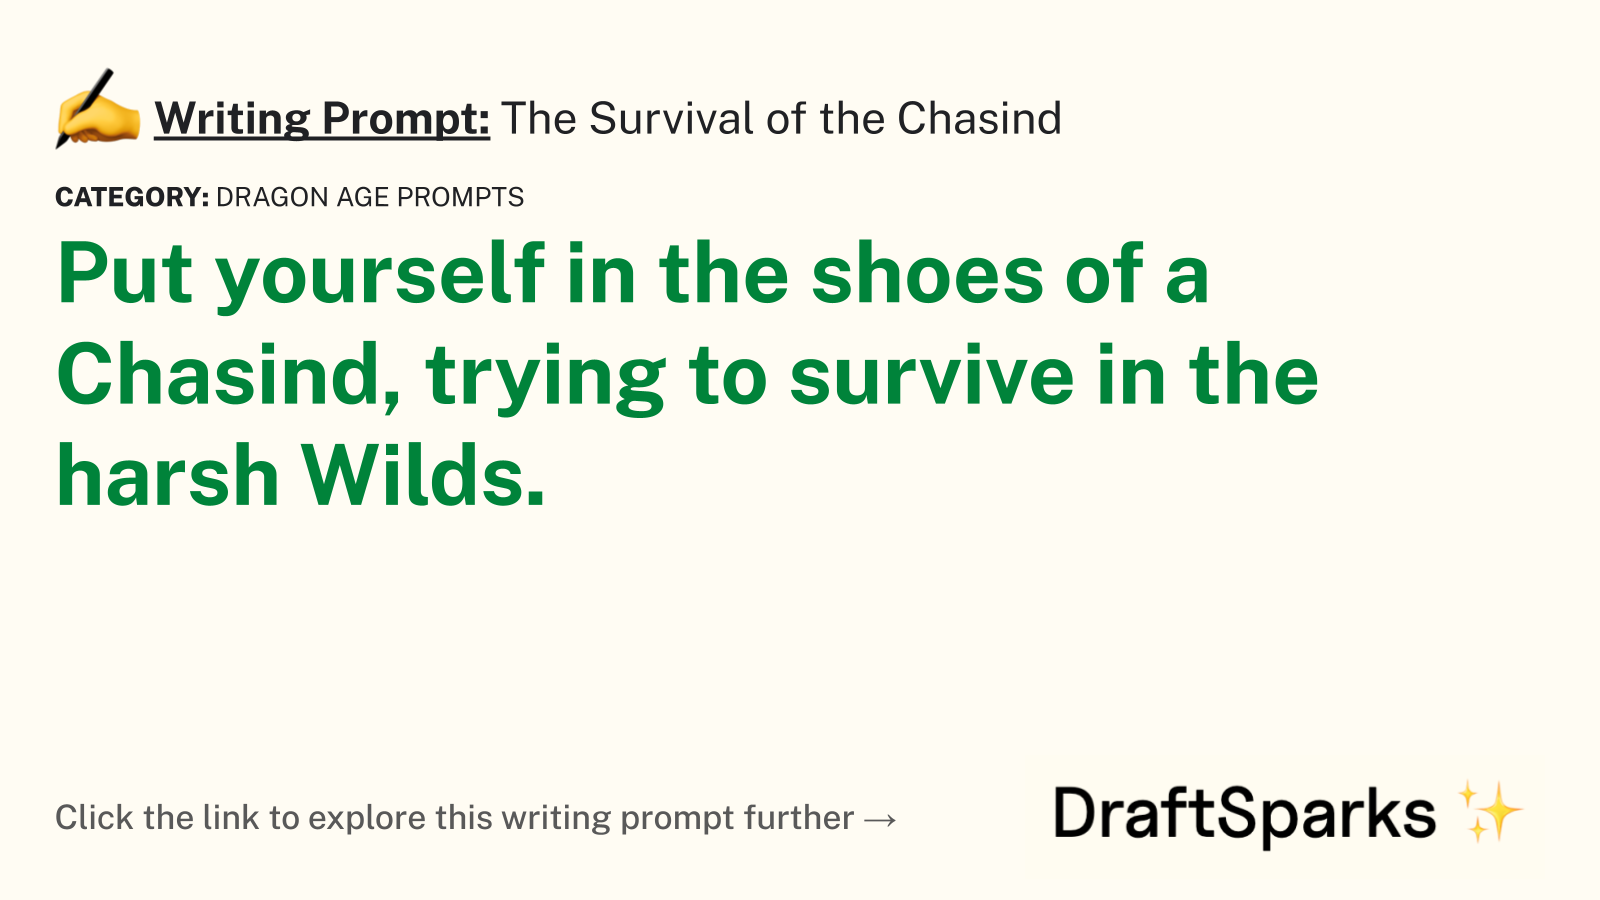 The Survival of the Chasind